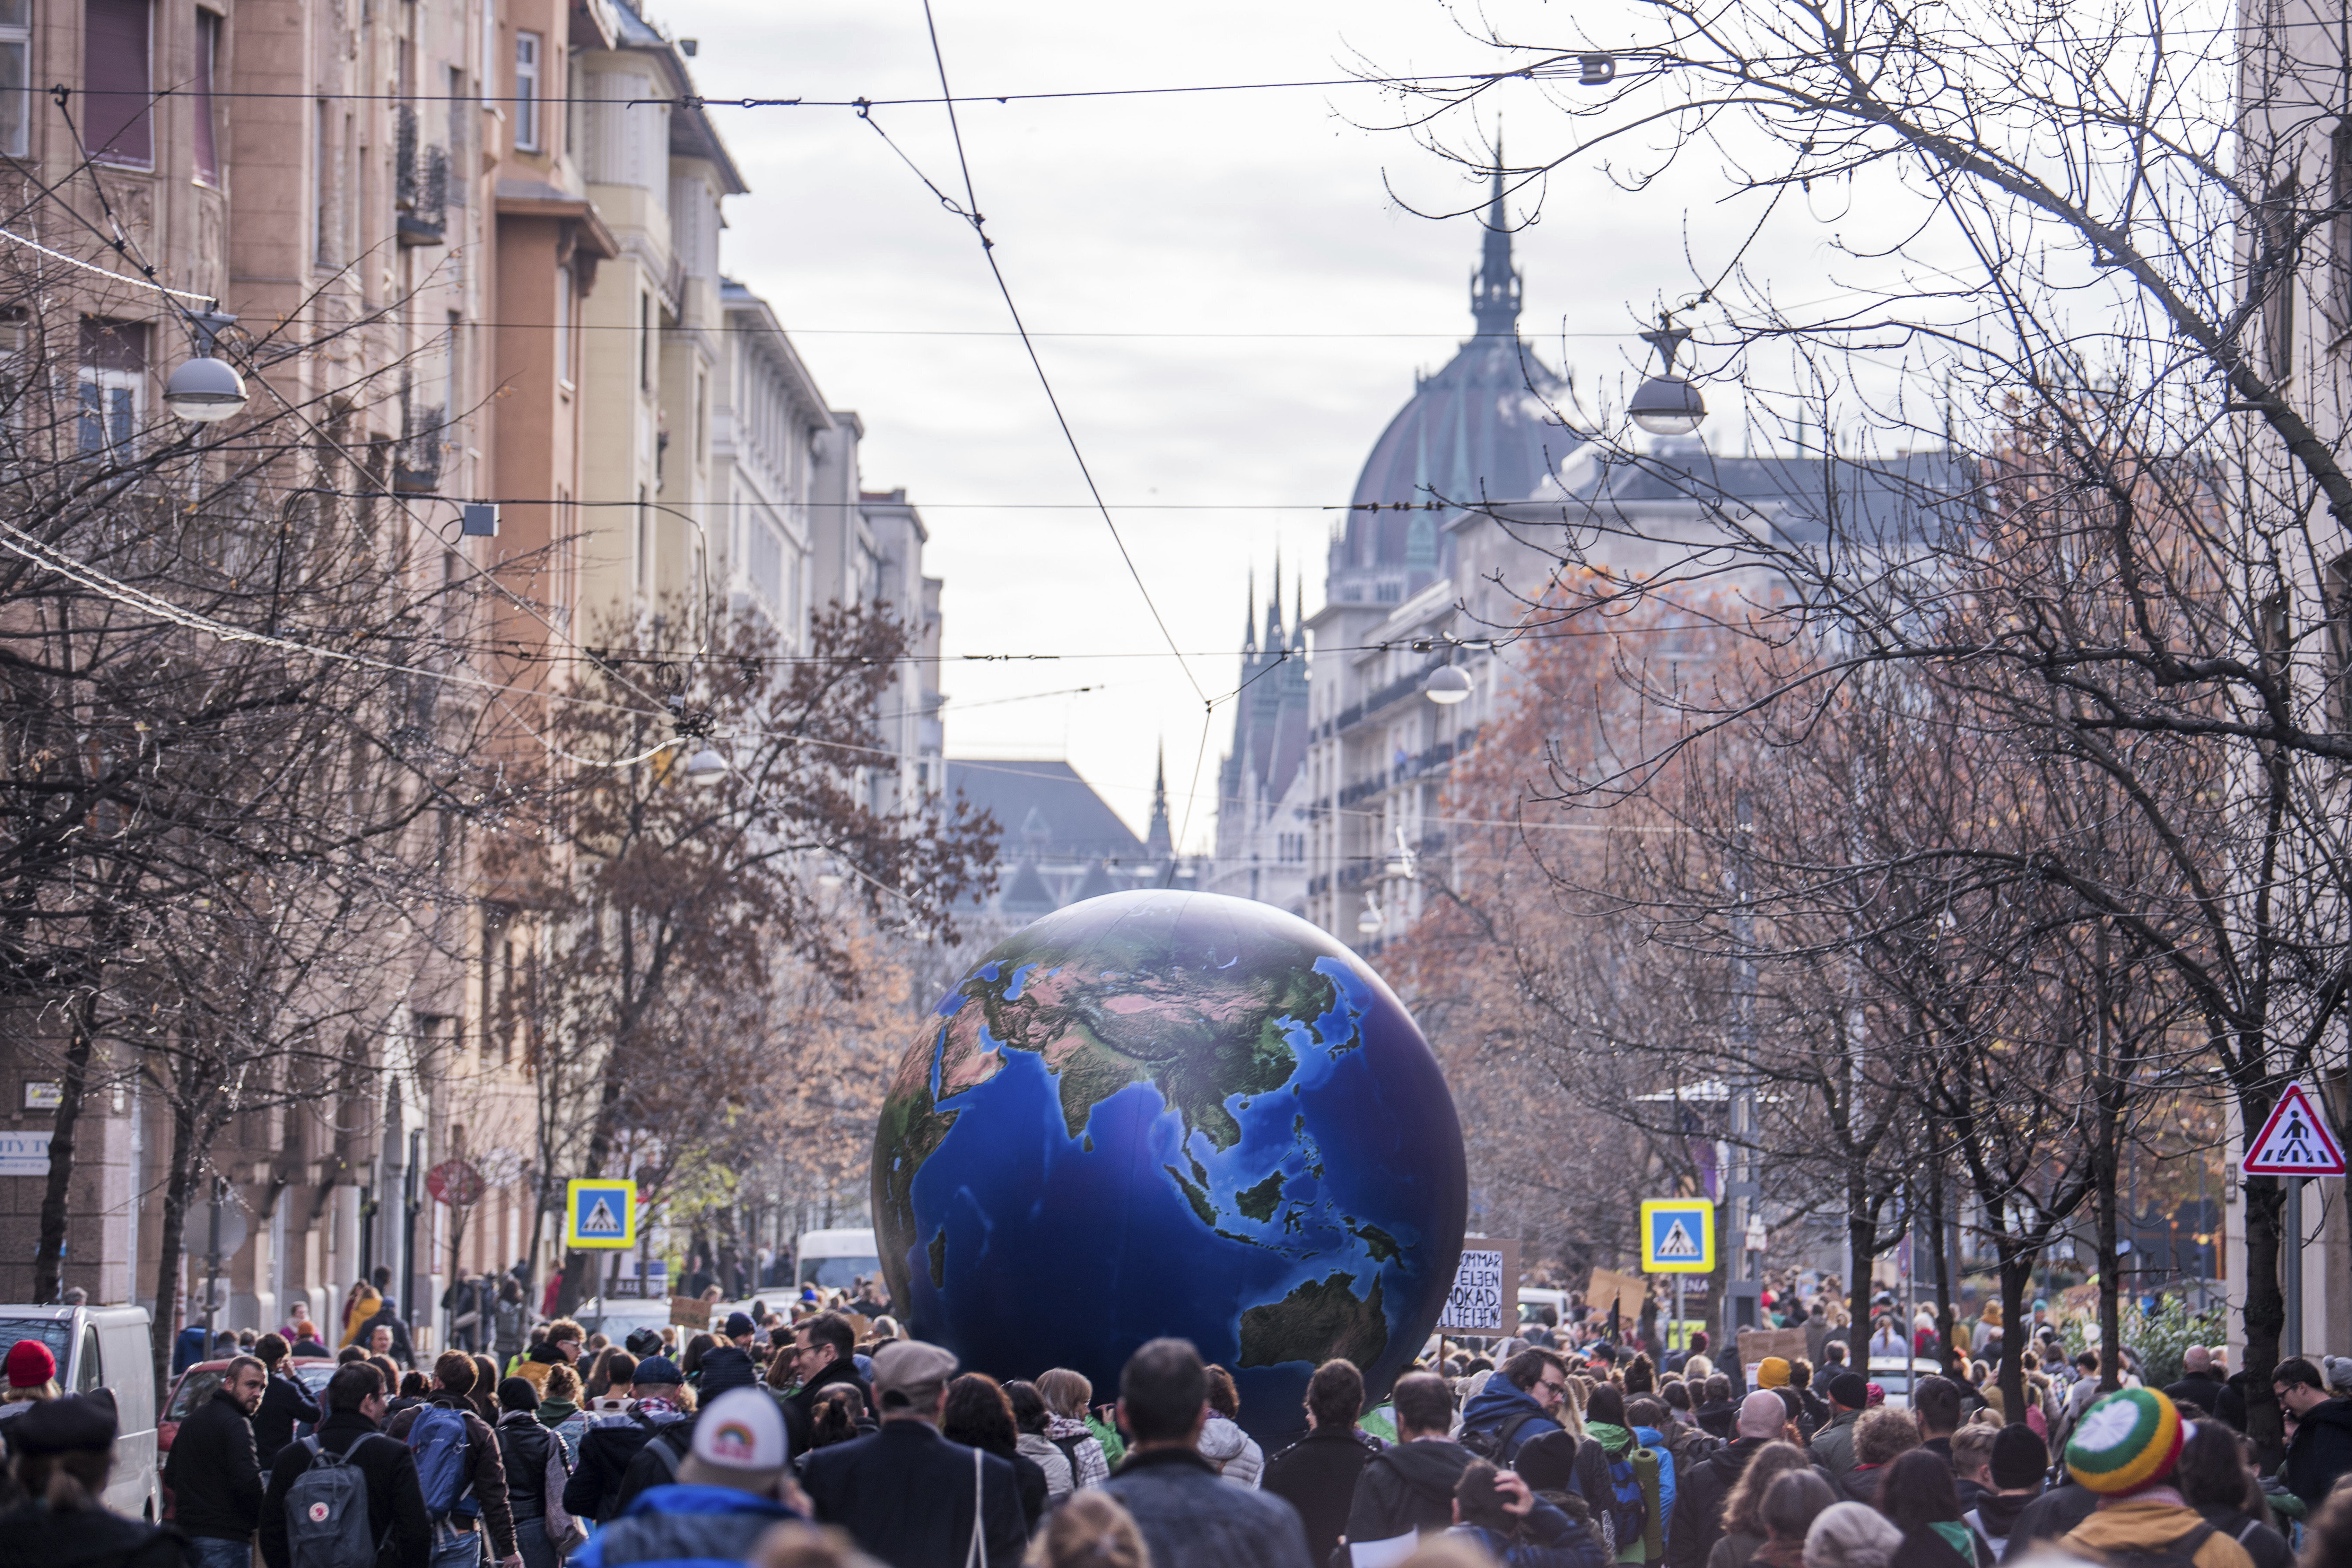 Following the call of Fridays For Future Hungary and Extinction Rebellion Hungary young environmentalists demonstrate to demand measures against climate change in Budapest, Hungary, Friday, Nov. 29, 2019. (Zoltan Balogh/MTI via AP)